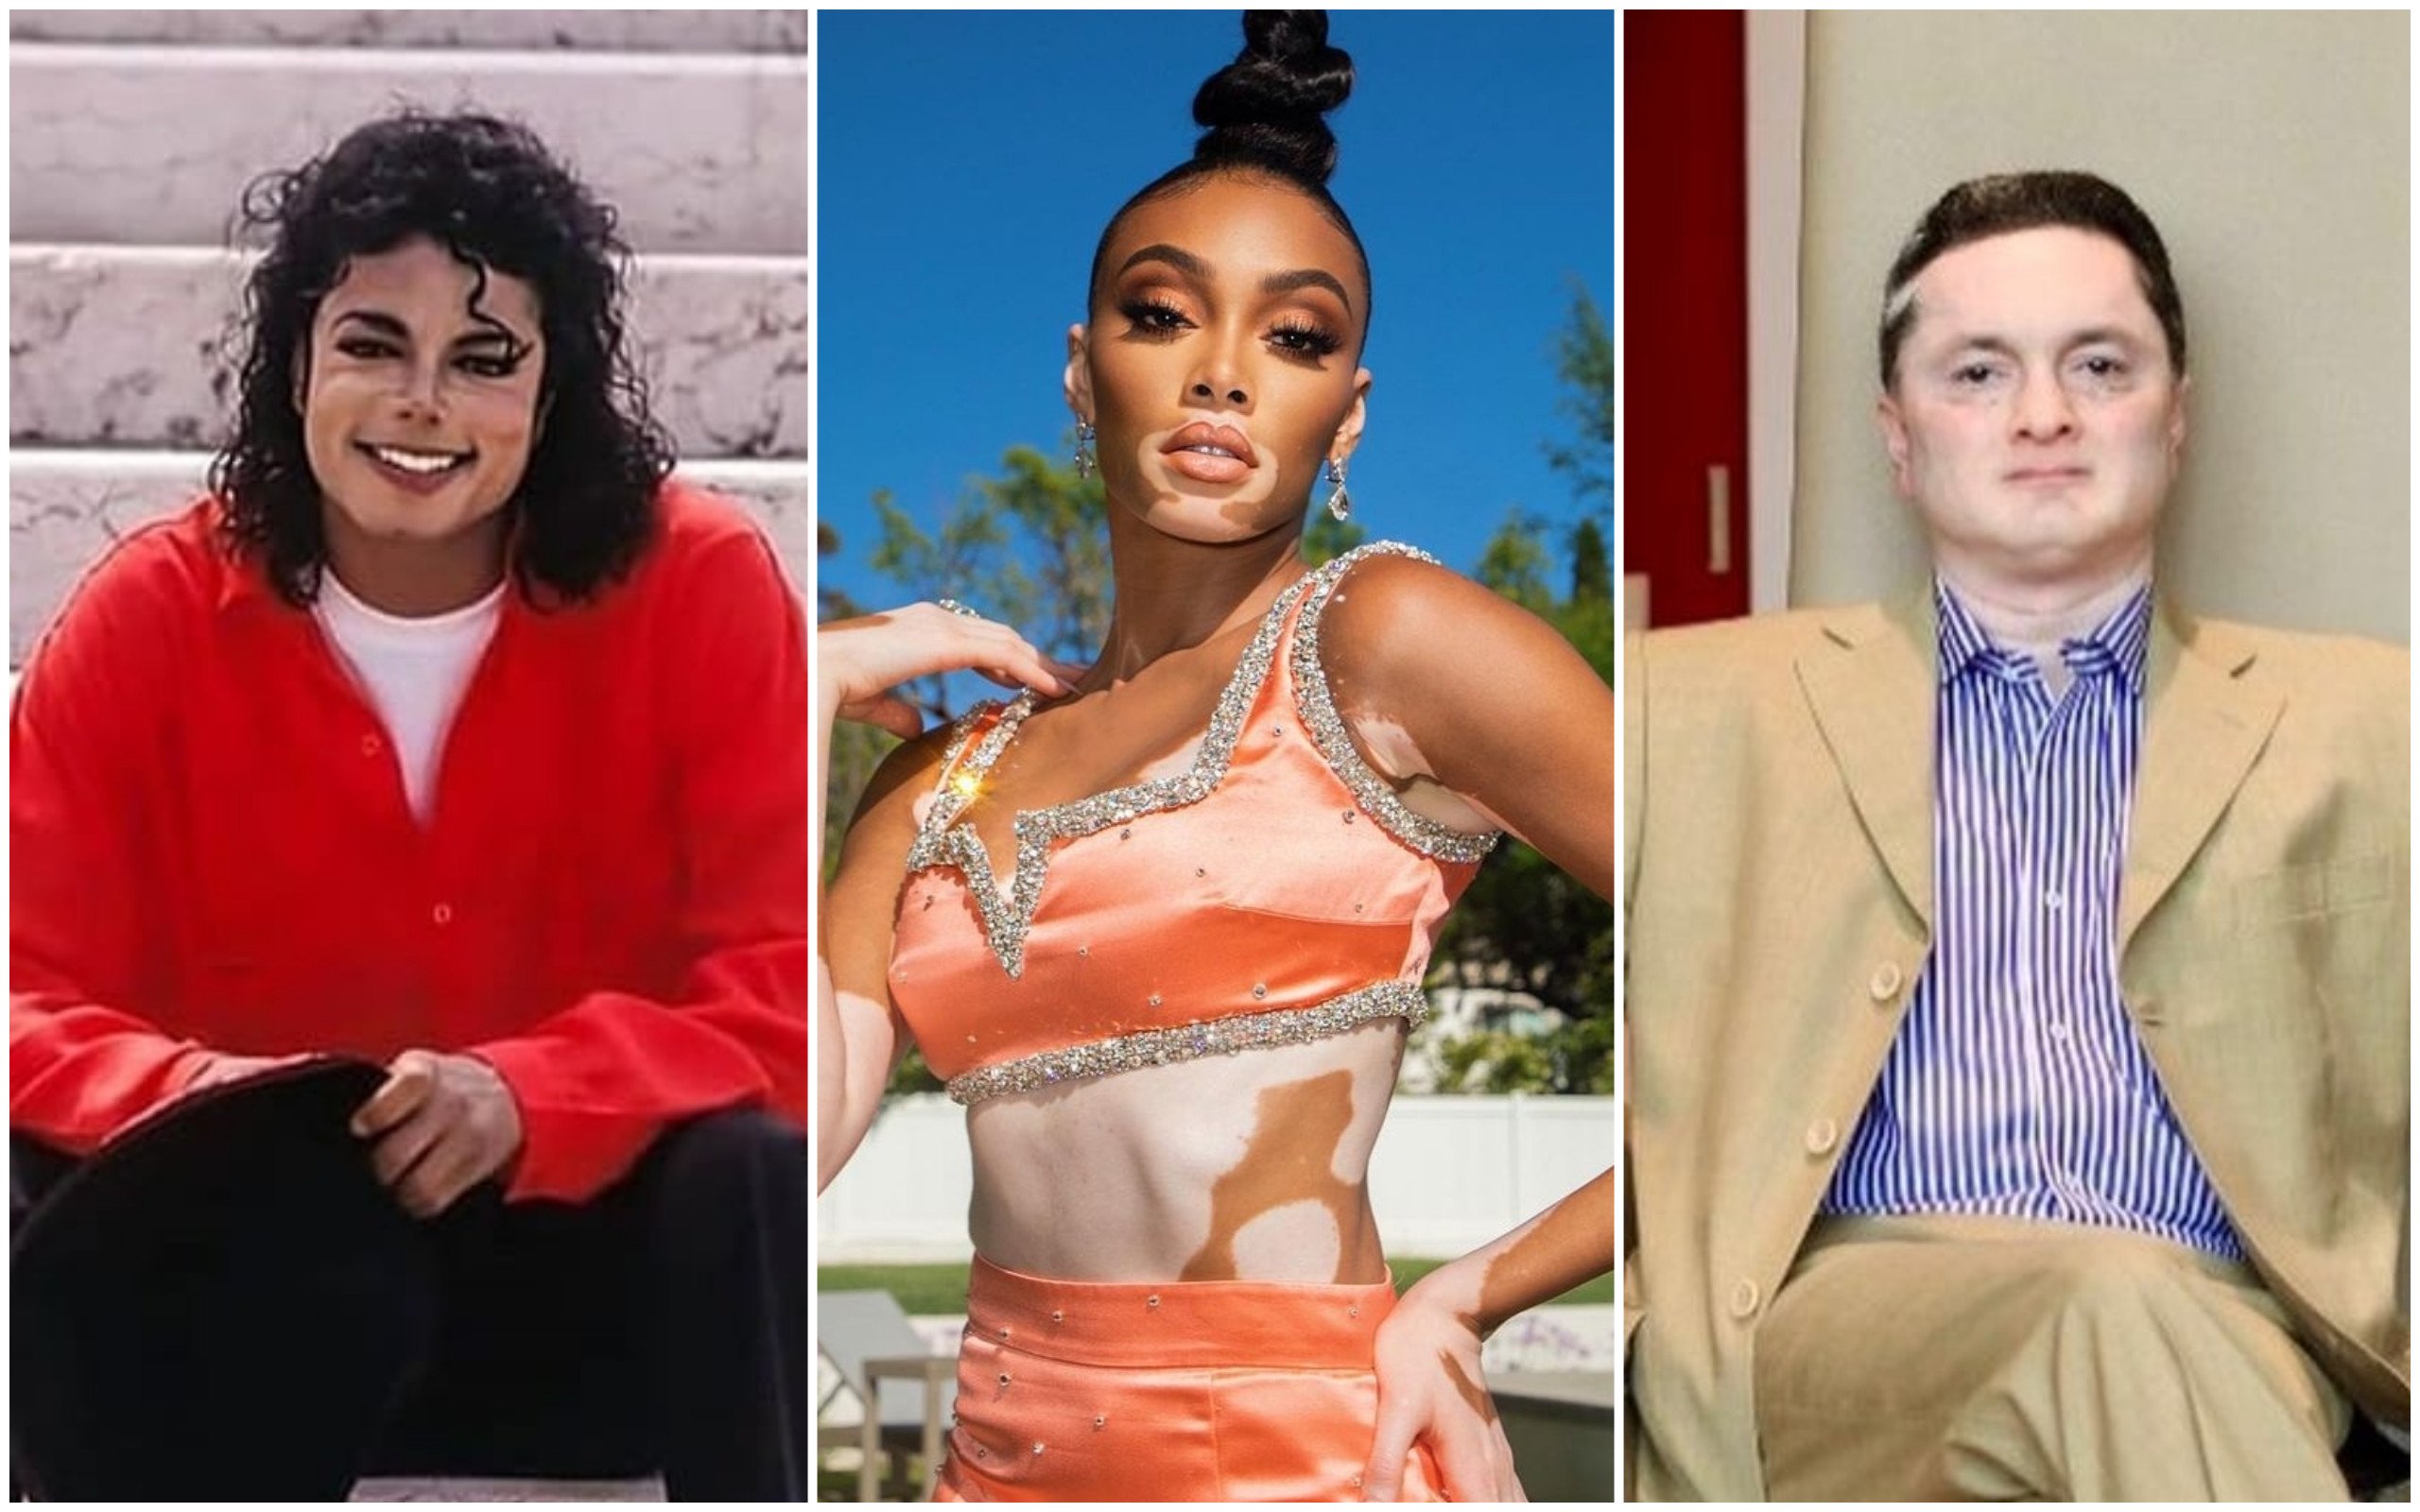 From left, Michael Jackson, model Winnie Harlow and Indian billionaire Gautam Singhania, who are among the celebrities with vitiligo, a condition that results in a whitening of the skin. Photos: @__m.j.the.king__, @winnieharlow, @gautamsinghania99/Instagram